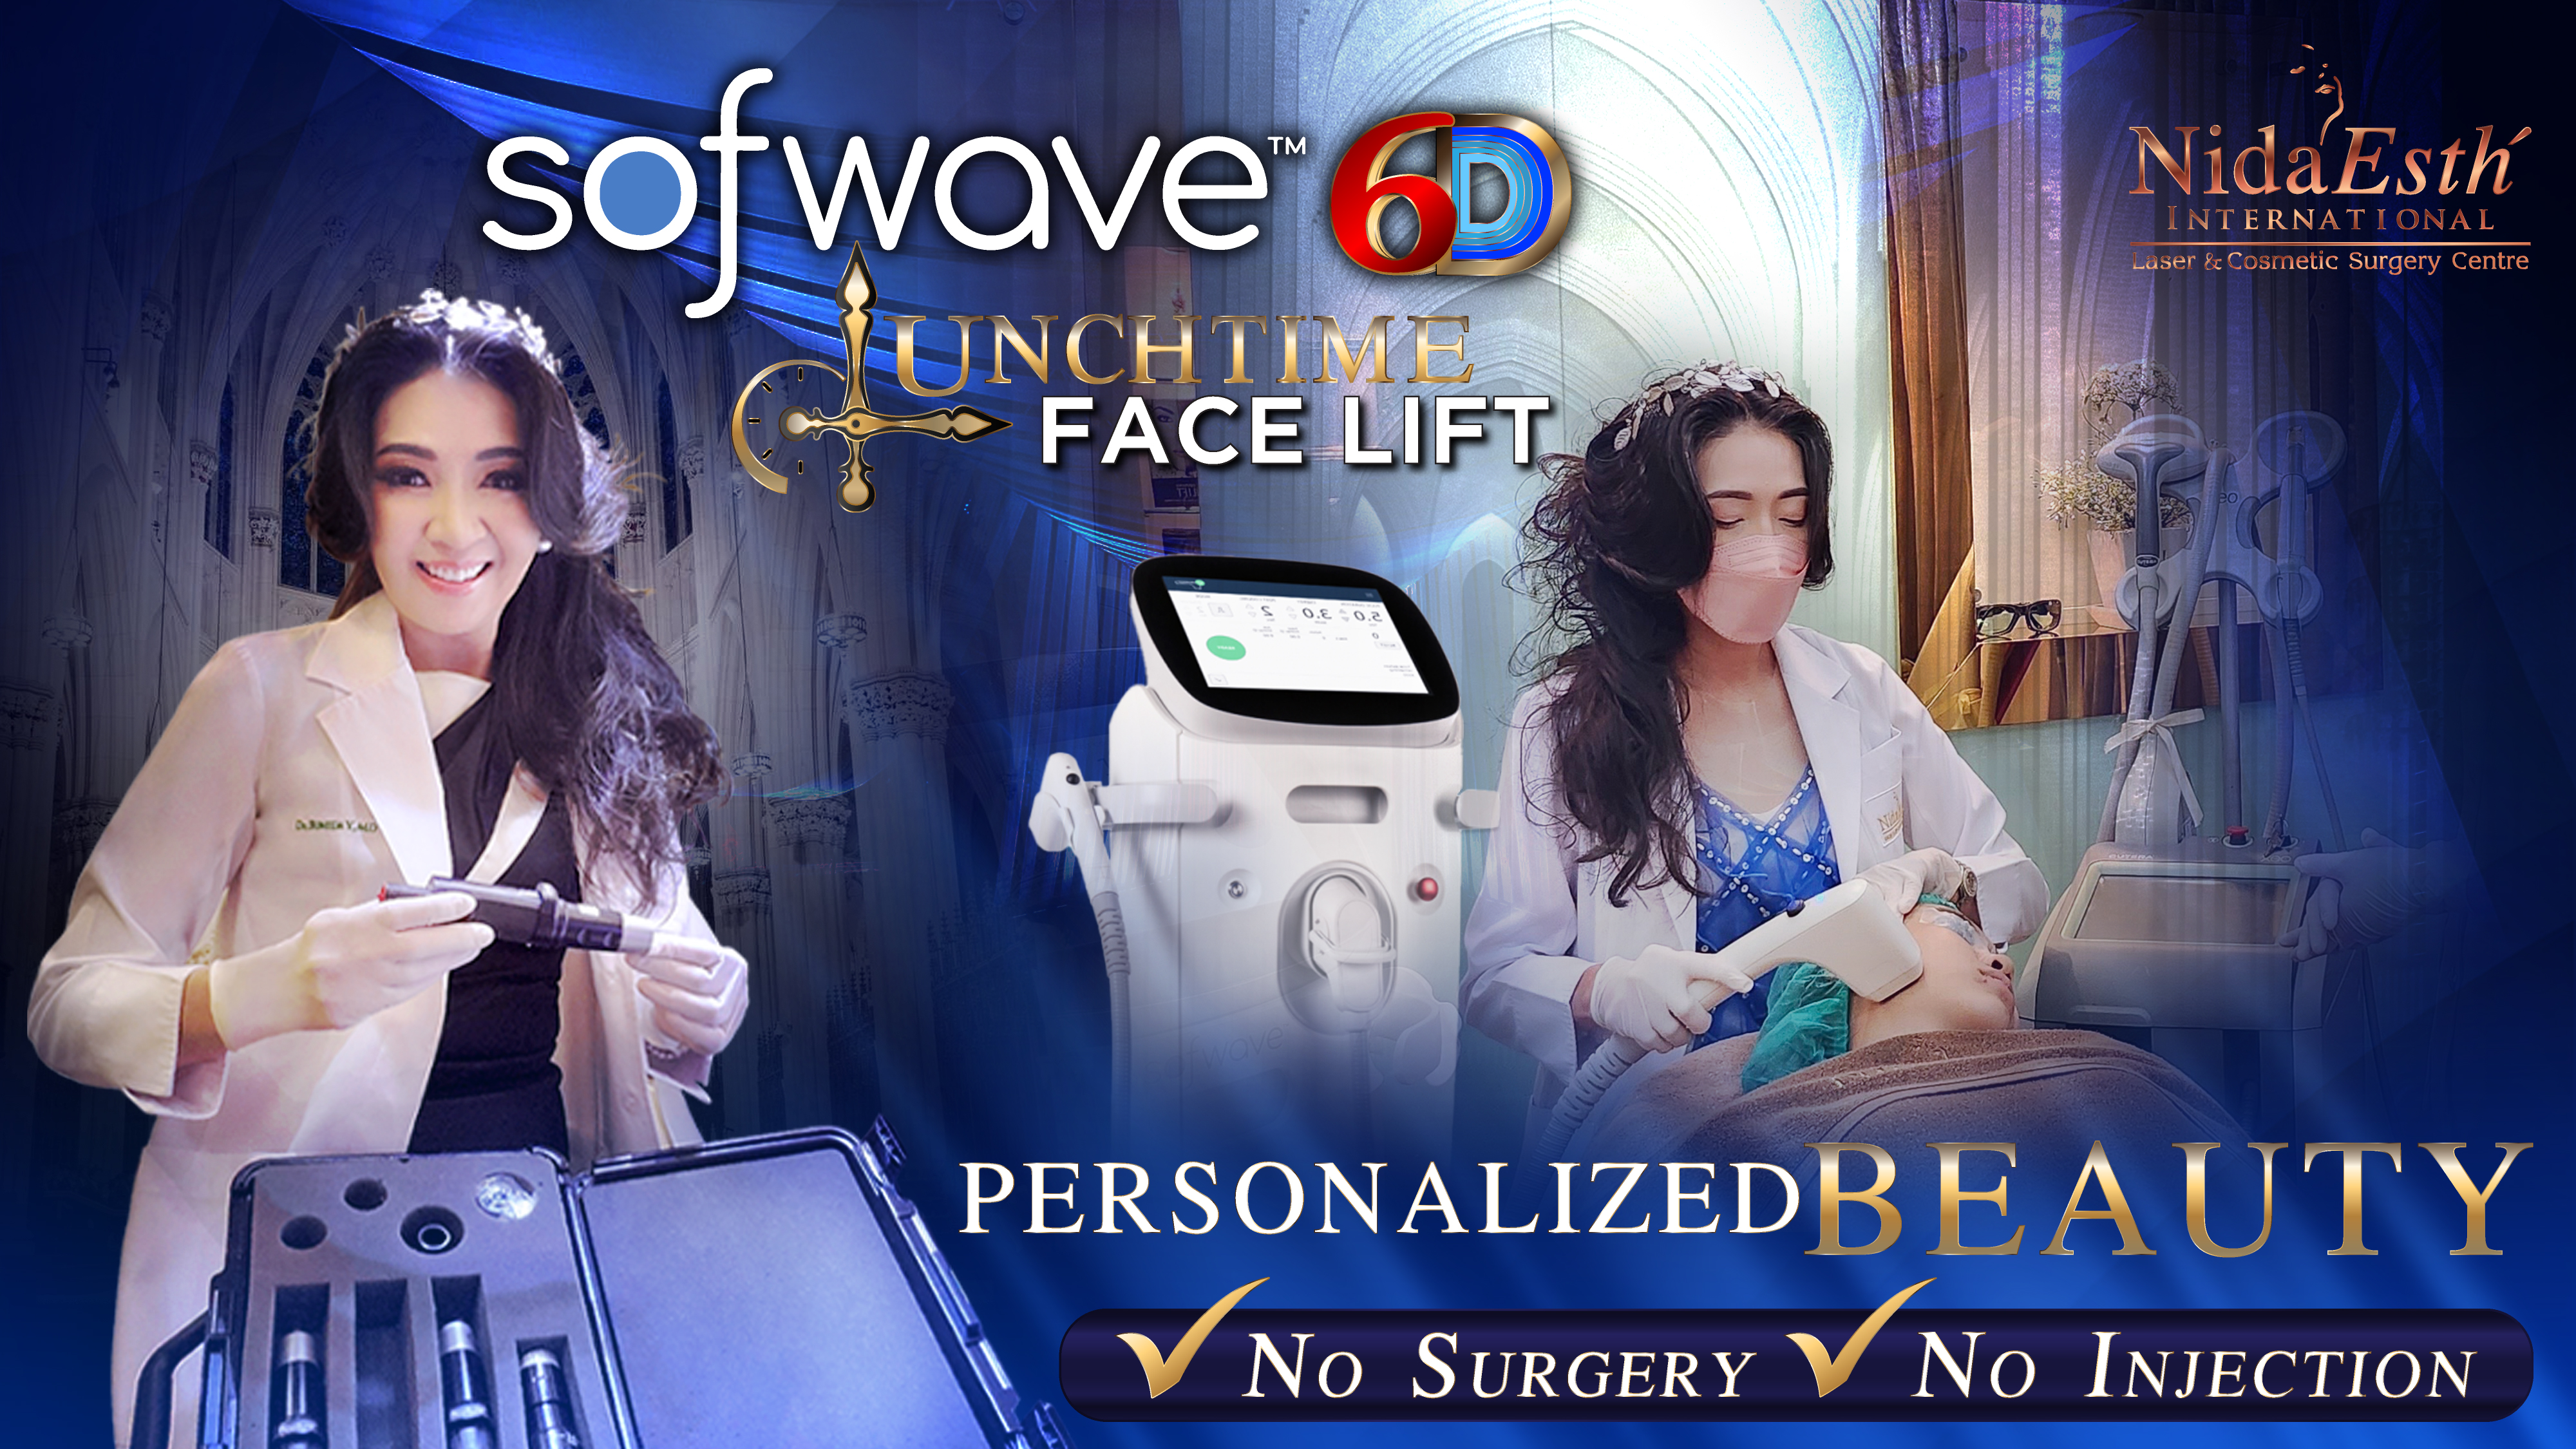 Sofwave 6D Facial Shaping, Lifting And Tightening